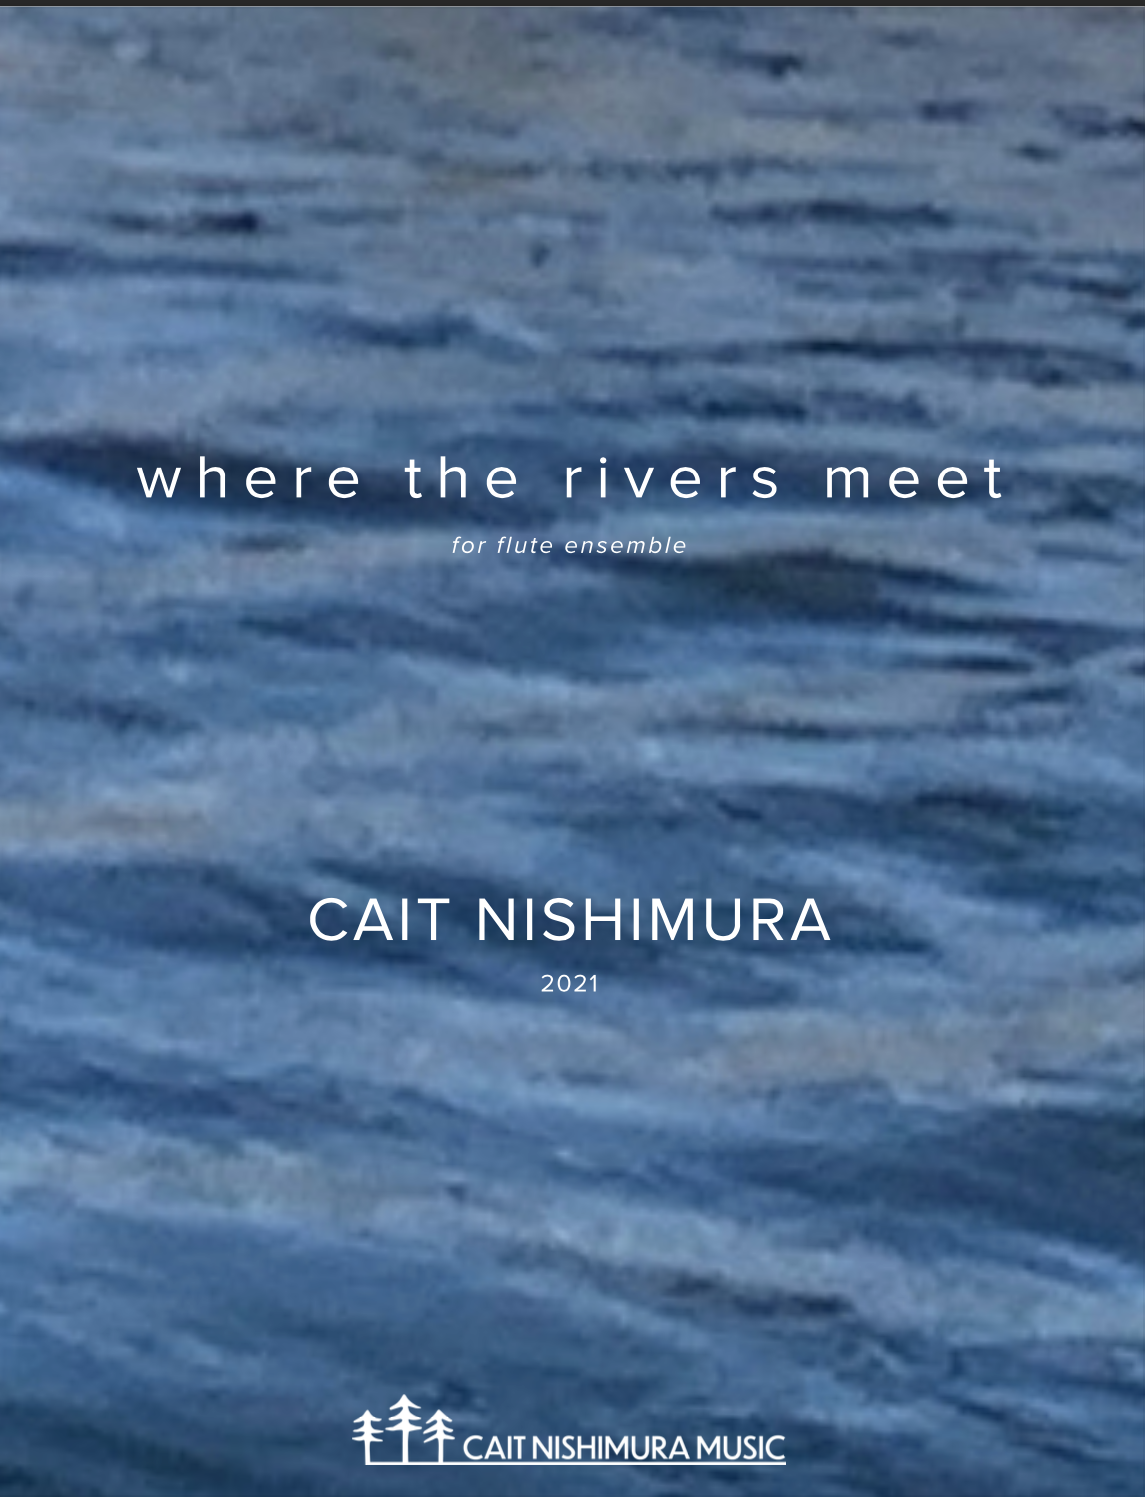 Where The Rivers Meet (Flute Version) by Cait Nishimura